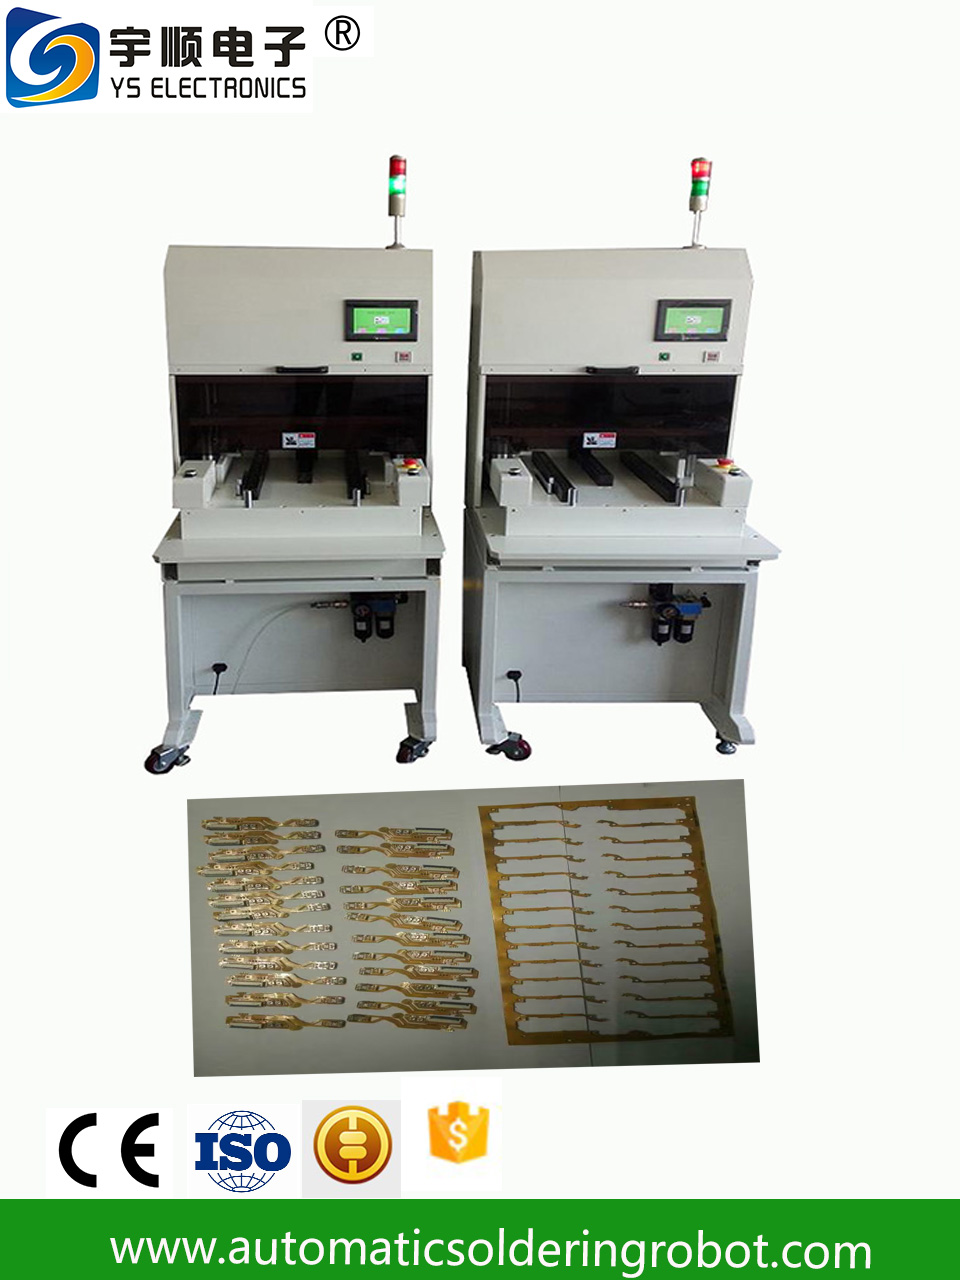 High Precision Pcb / Fpc Punch Separator Pcb Depaneling Machine For Pcb Assembly-High Precision Pcb / Fpc Punch Separator Pcb Depaneling Machine For Pcb Assembly Manufacturers, Suppliers and Exporters on pcbcuttingmachine.com Electronics Production Machinery